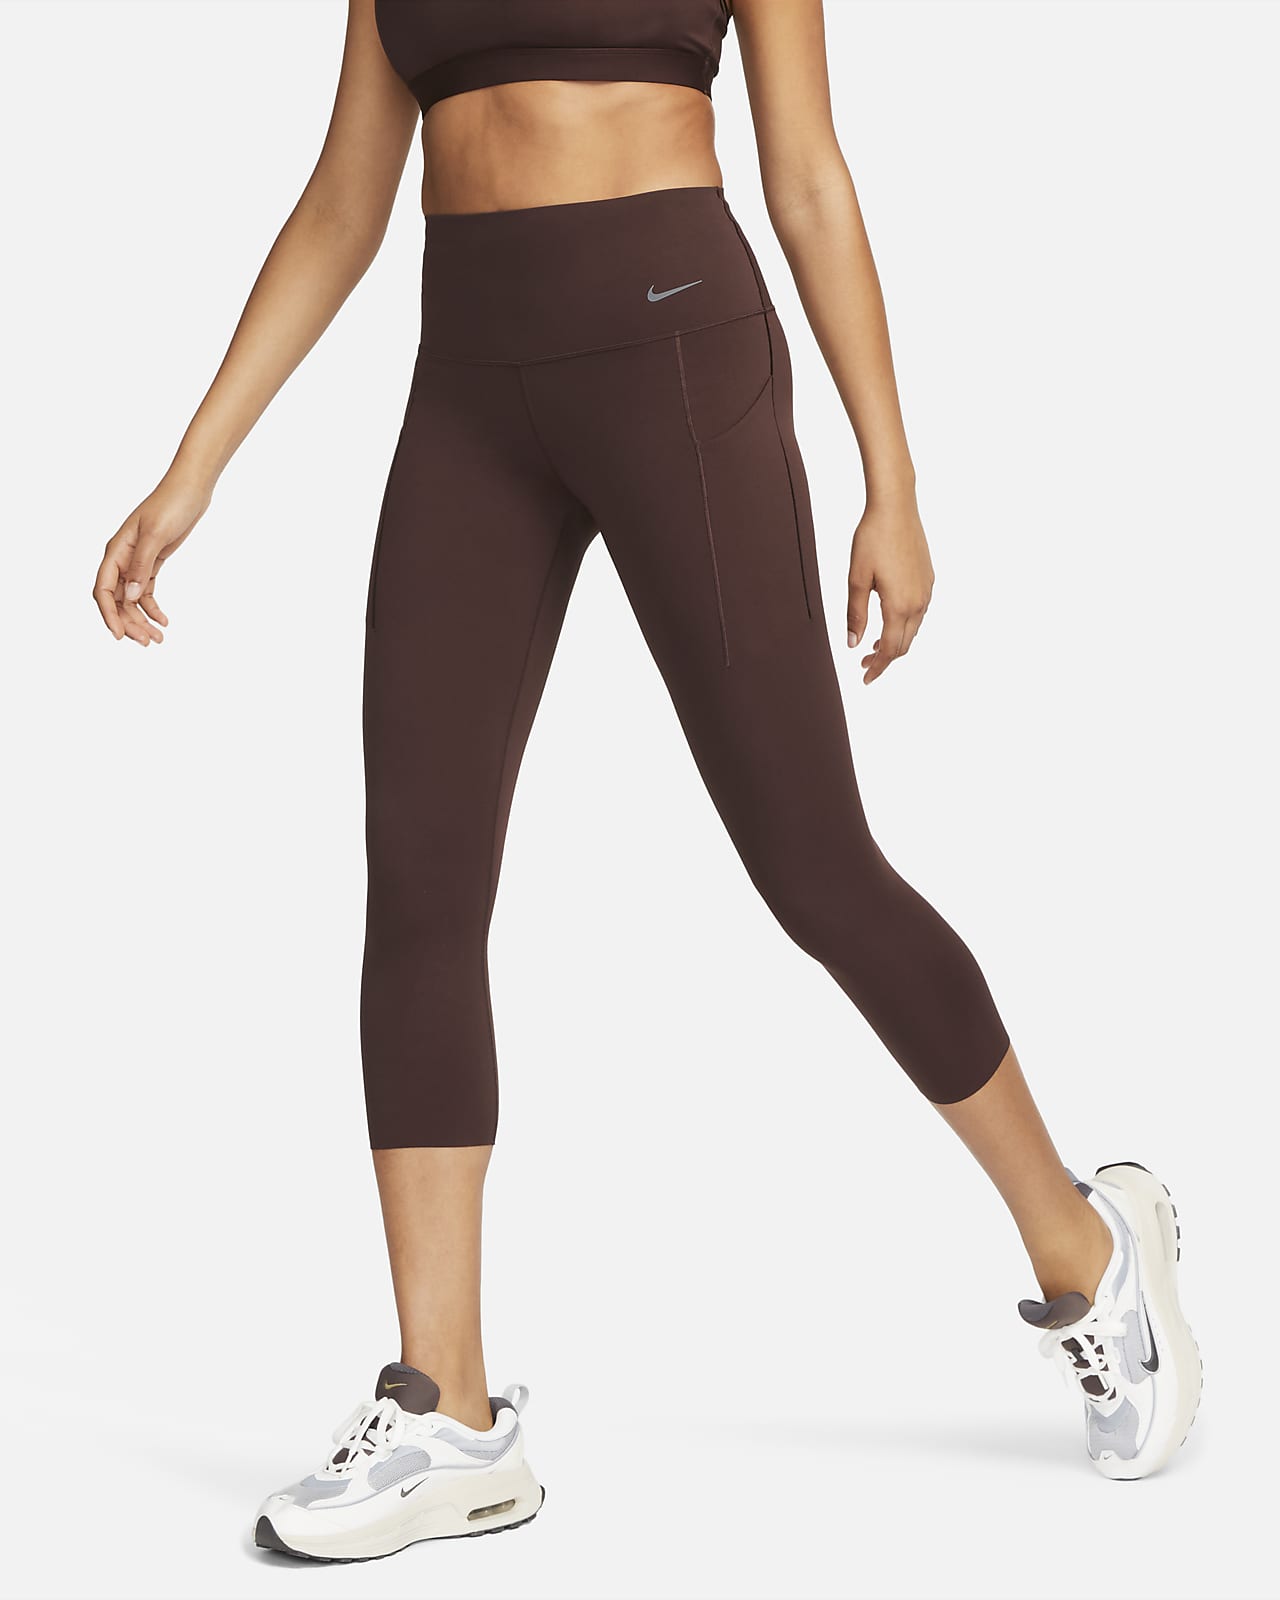 Whirlpool Auckland Voorbijganger Nike Universa Women's Medium-Support High-Waisted Cropped Leggings with  Pockets. Nike.com